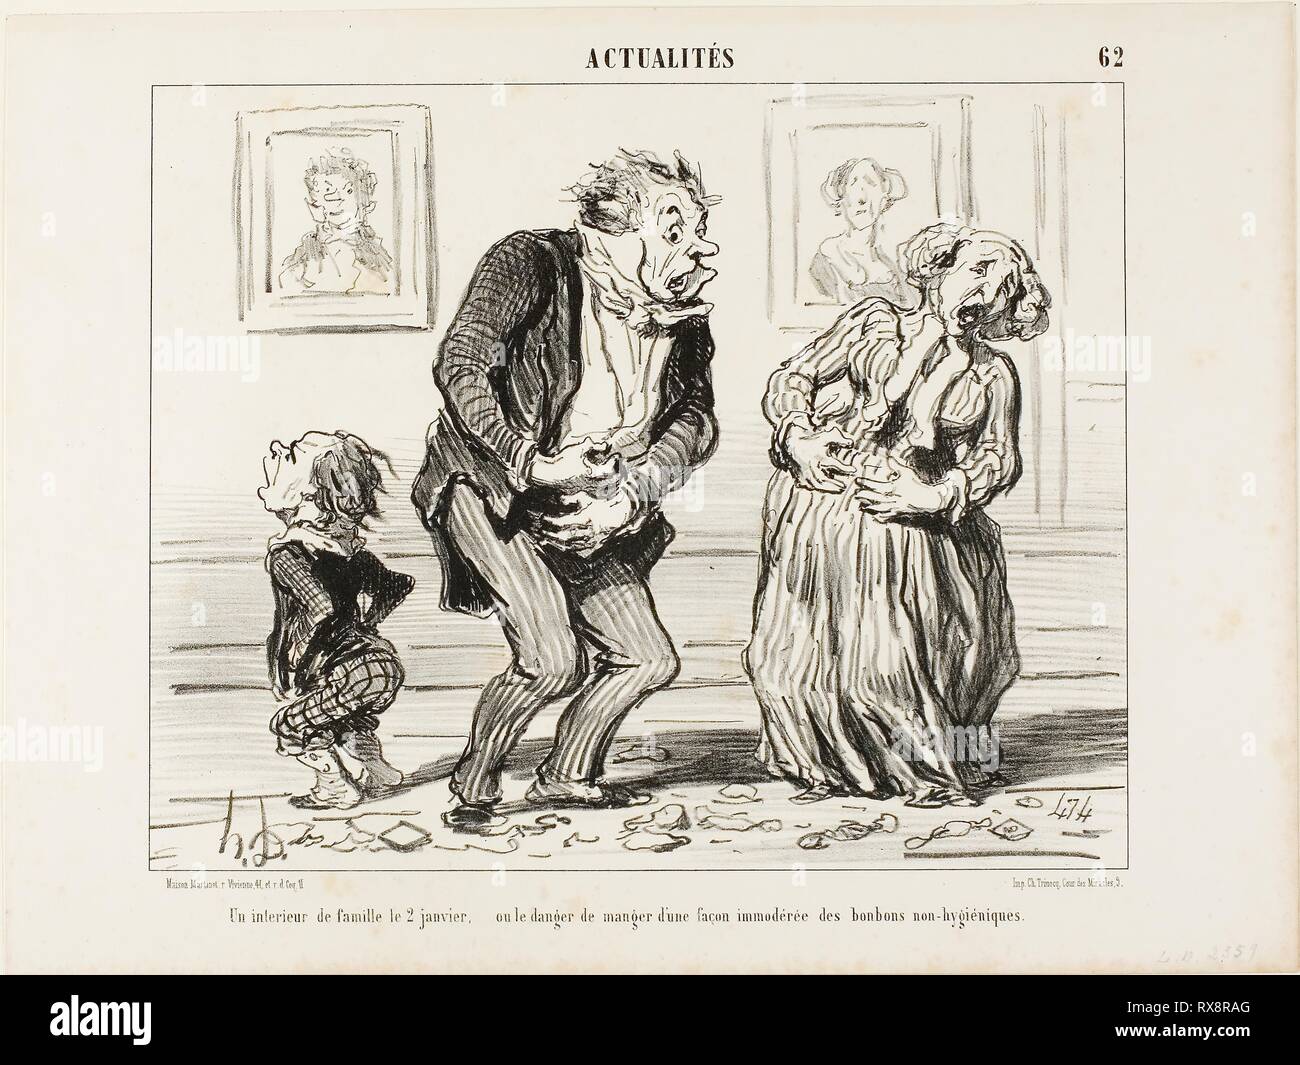 The Interior of a Family on January 2 - or the Danger of Consuming Immoderately Non-Hygienic Sweets, plate 62 from Actualités. Honoré Victorin Daumier; French, 1808-1879. Date: 1853. Dimensions: 214 × 265 mm (image); 262 × 352 mm (sheet). Lithograph in black on white wove paper. Origin: France. Museum: The Chicago Art Institute. Author: Honoré-Victorin Daumier. Stock Photo